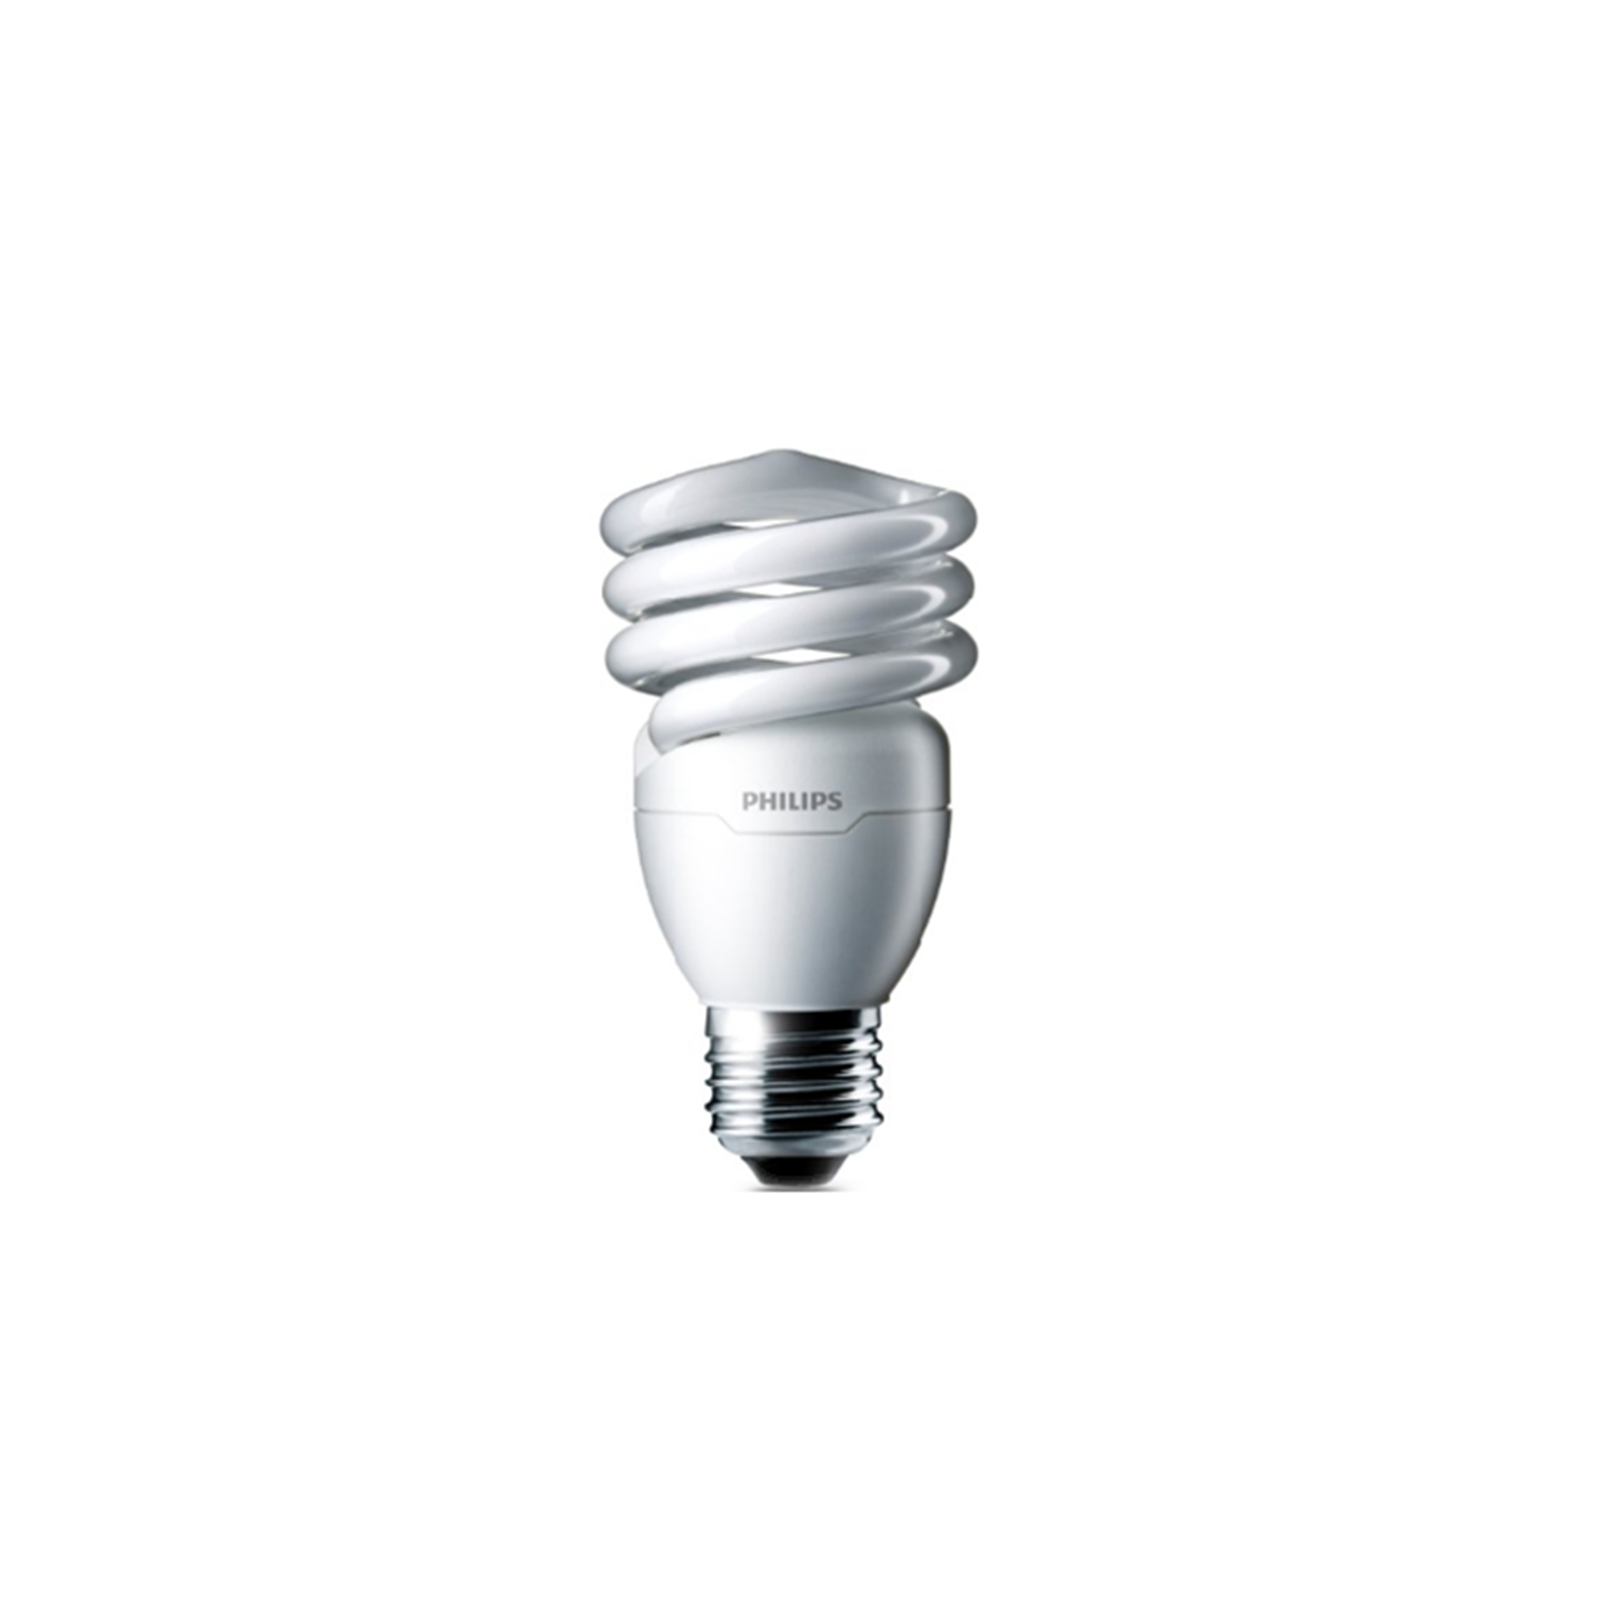 Philips 15W Cool Daylight BC Spiral Globe - 6 Pack